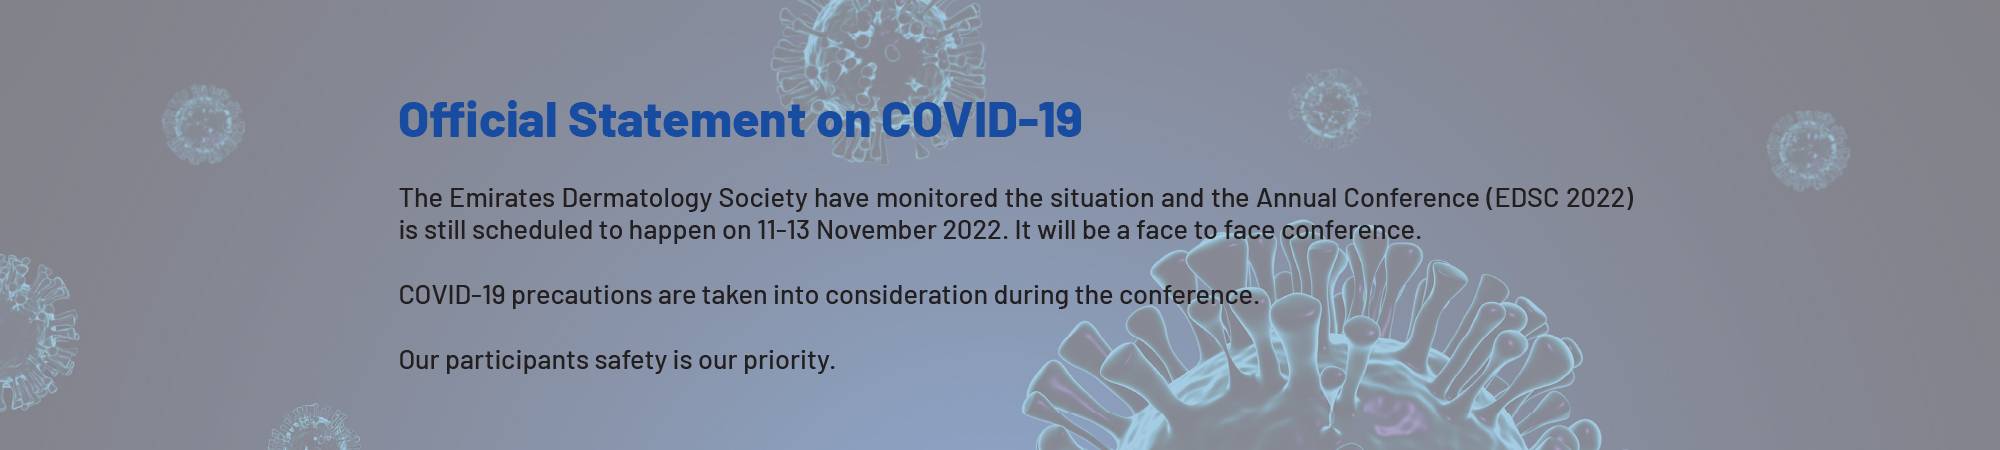 Official Statement on COVID-19